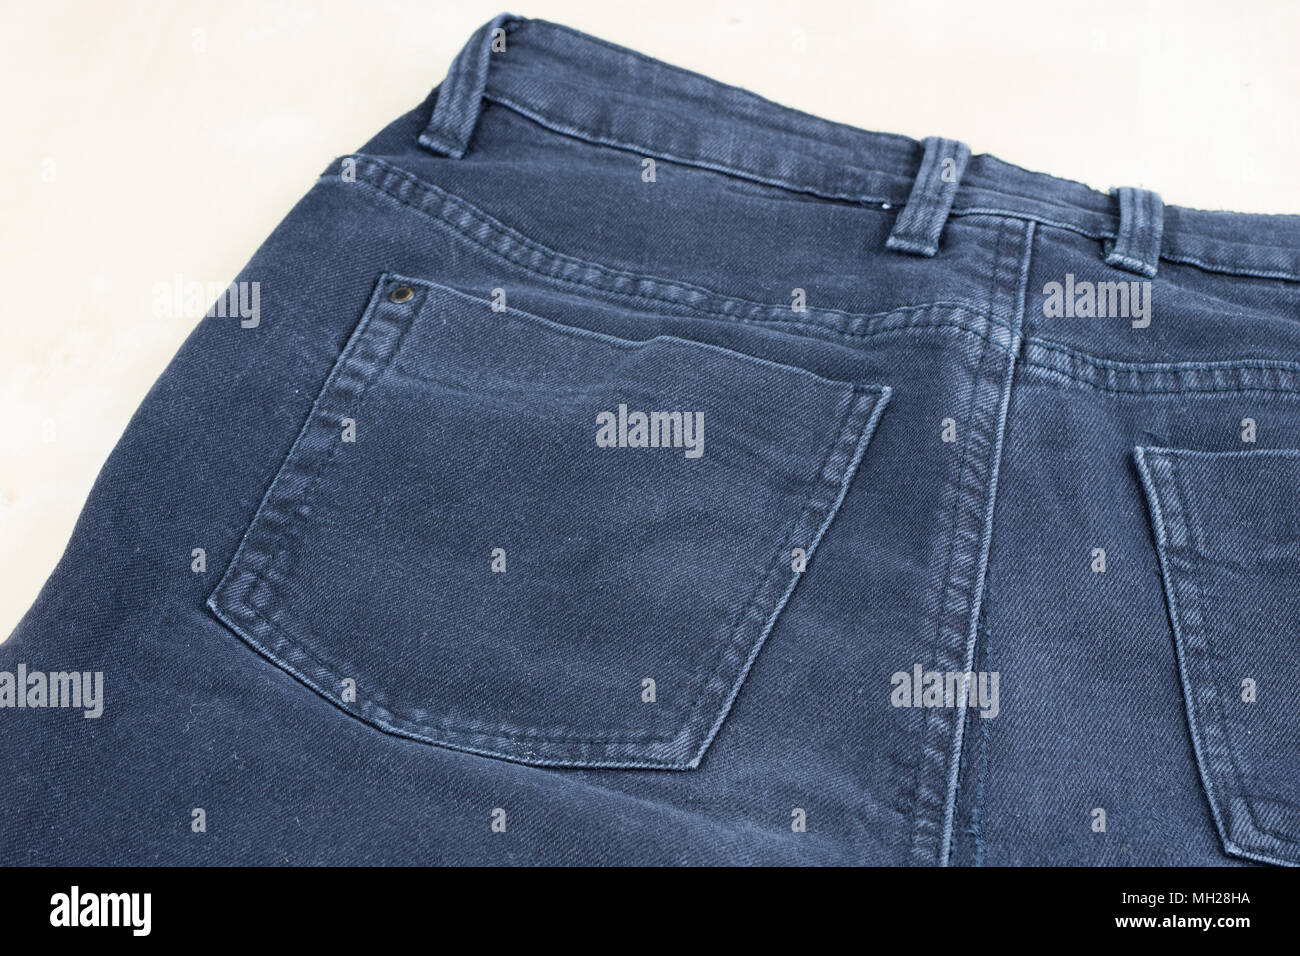 Denim shorts under magnification. Trouser zipper, belt loops and other ...